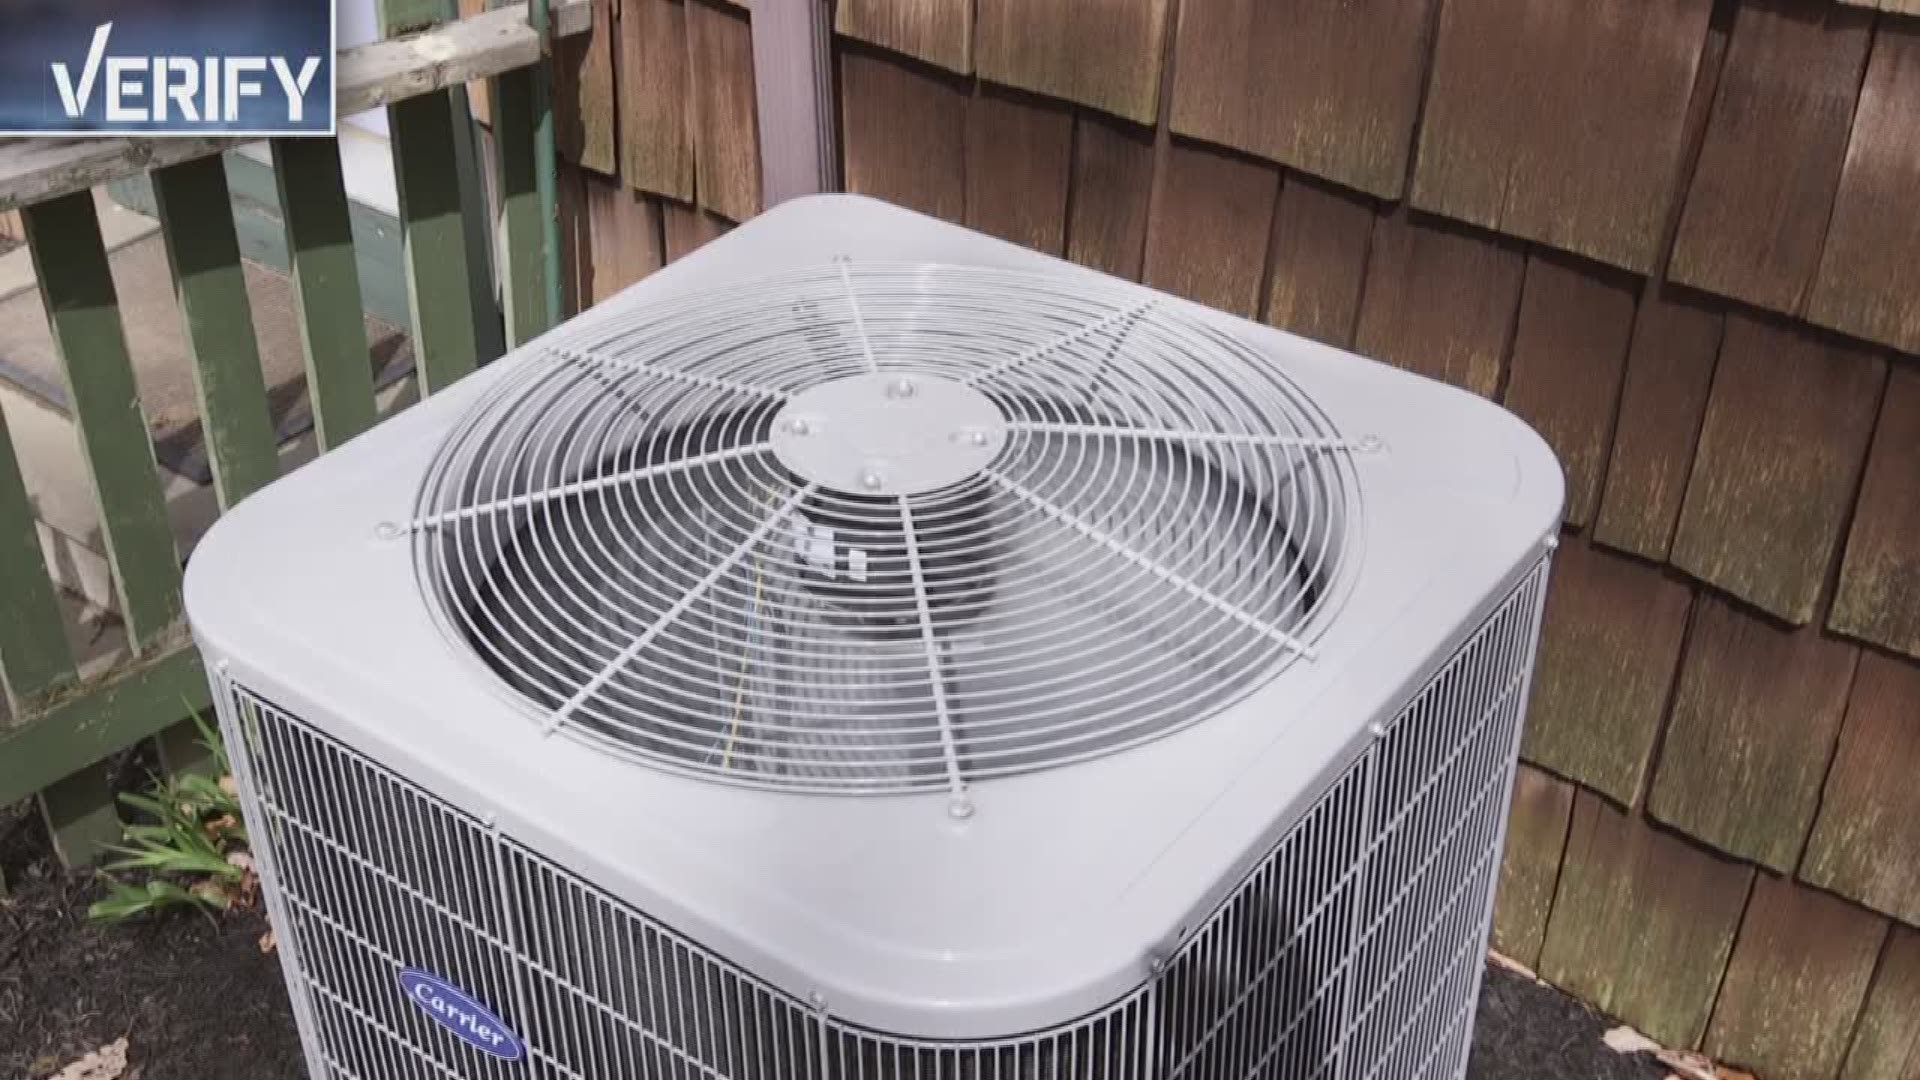 Does a landlord have to fix a broken air conditioner right away? Nico Santos explains the law regarding broken air conditioning units.